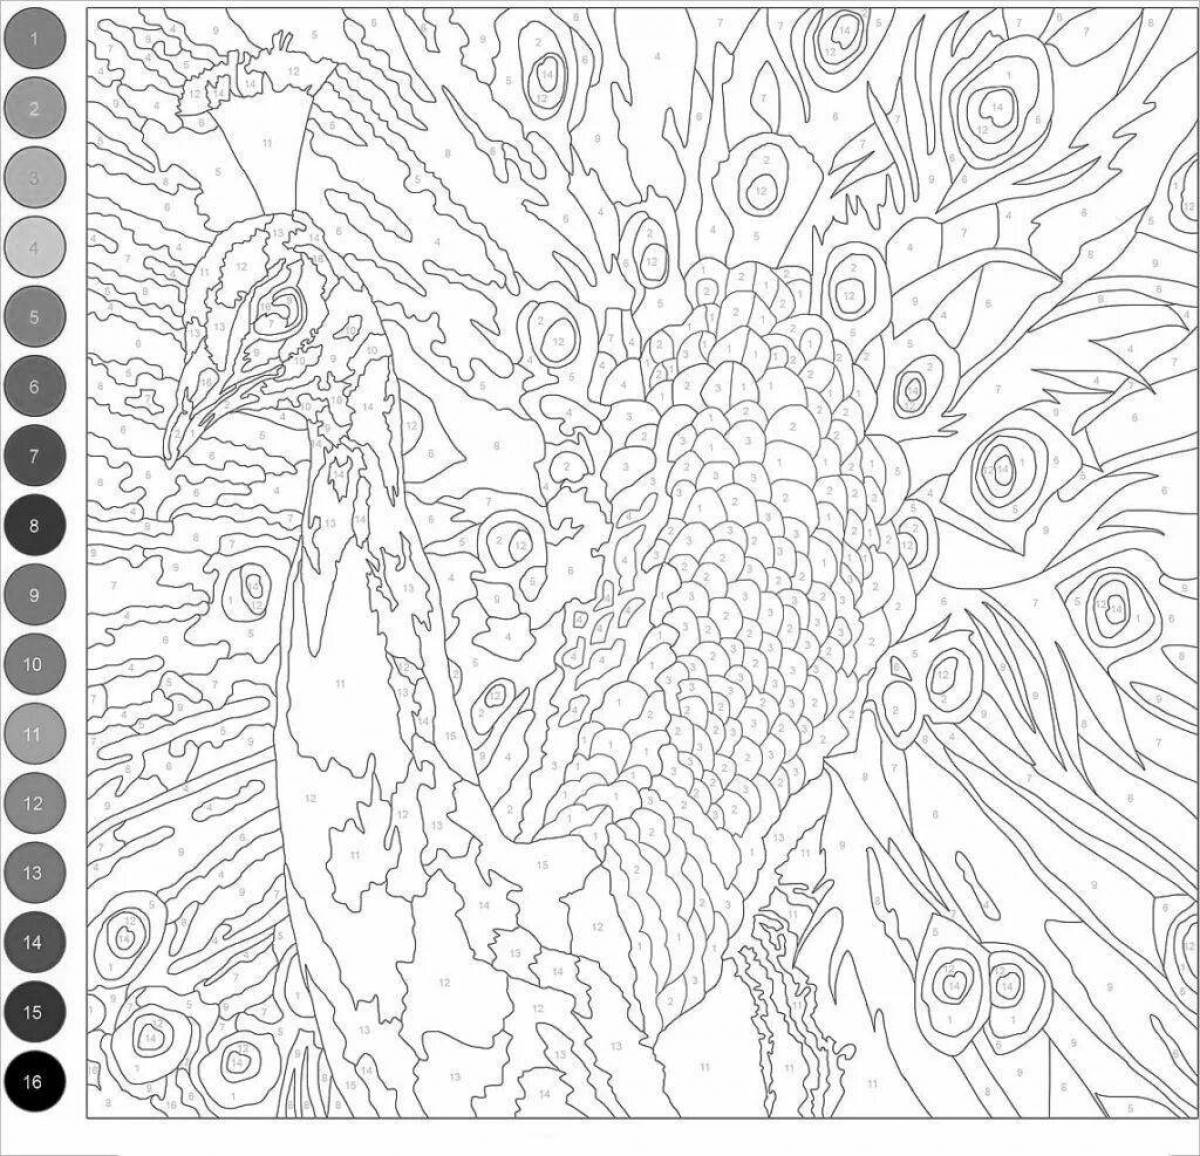 Updating adult coloring page by numbers